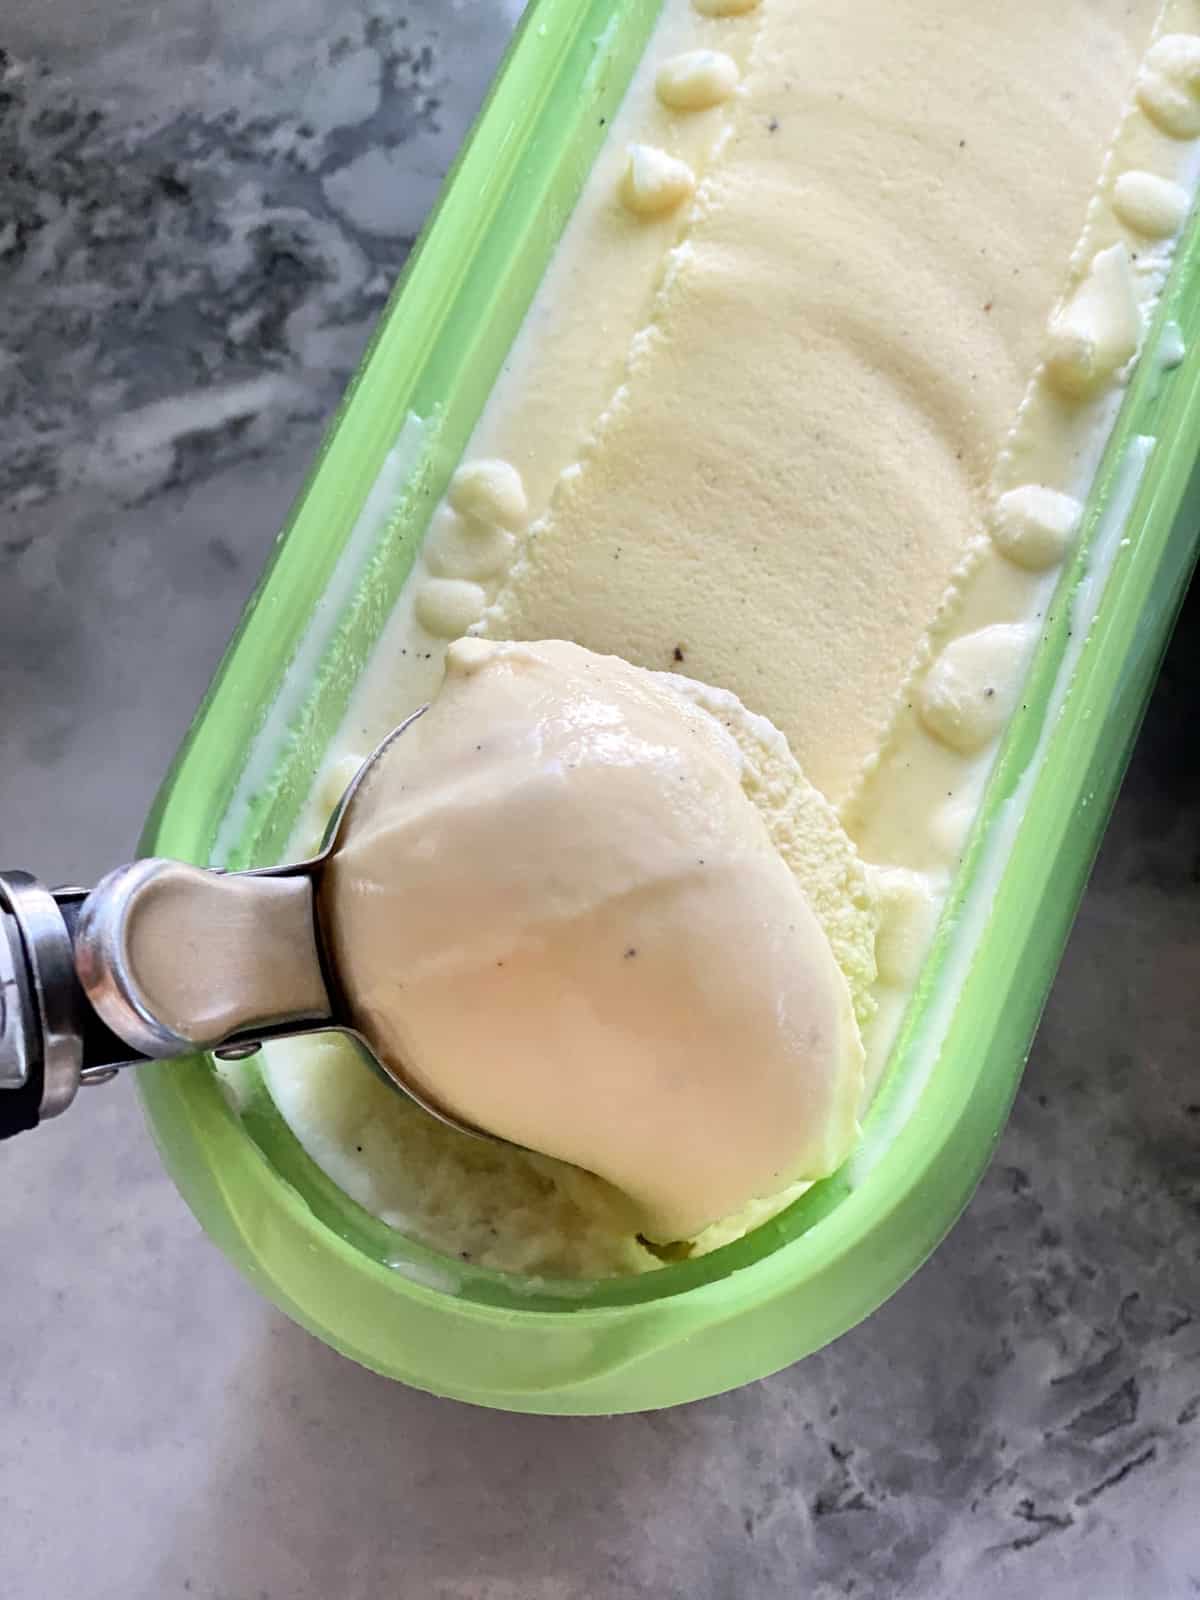 Green ice cream container filled with vanilla ice cream with an ice cream scoop in the container.